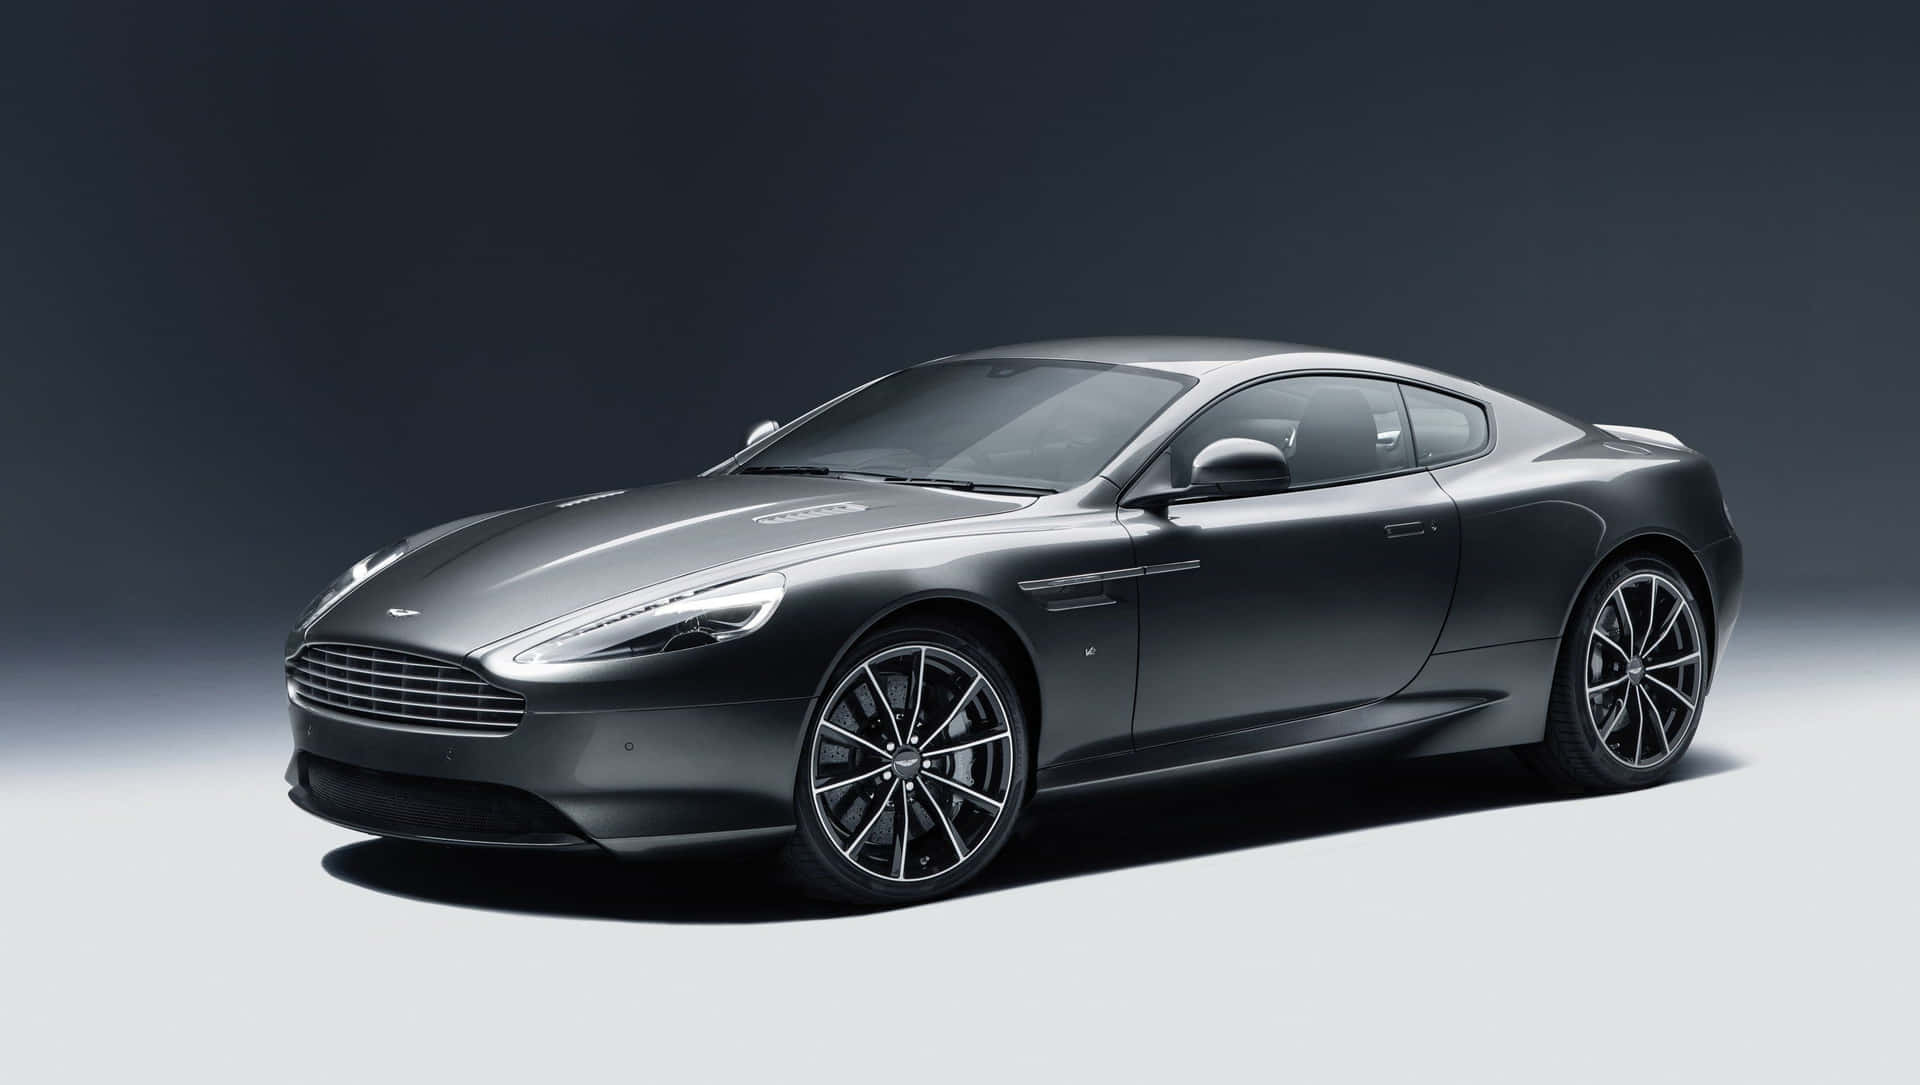 Aston Martin Db9: A Classic Blend of Elegance and Performance Wallpaper